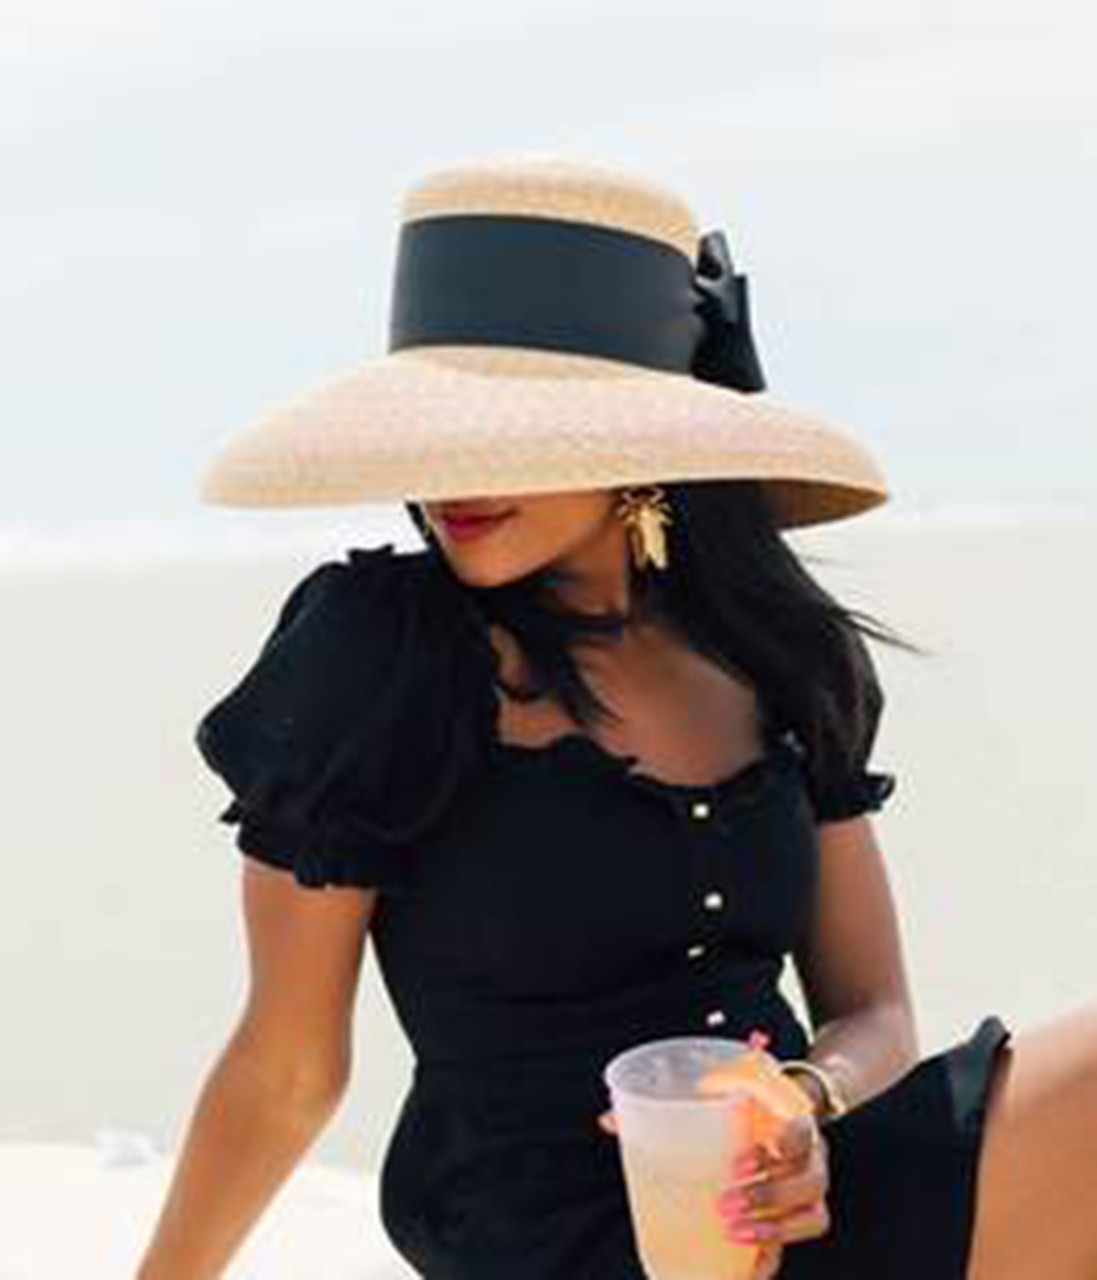 Lisi Lerch Straw Hat with Navy Raffia And Tennis Adornment